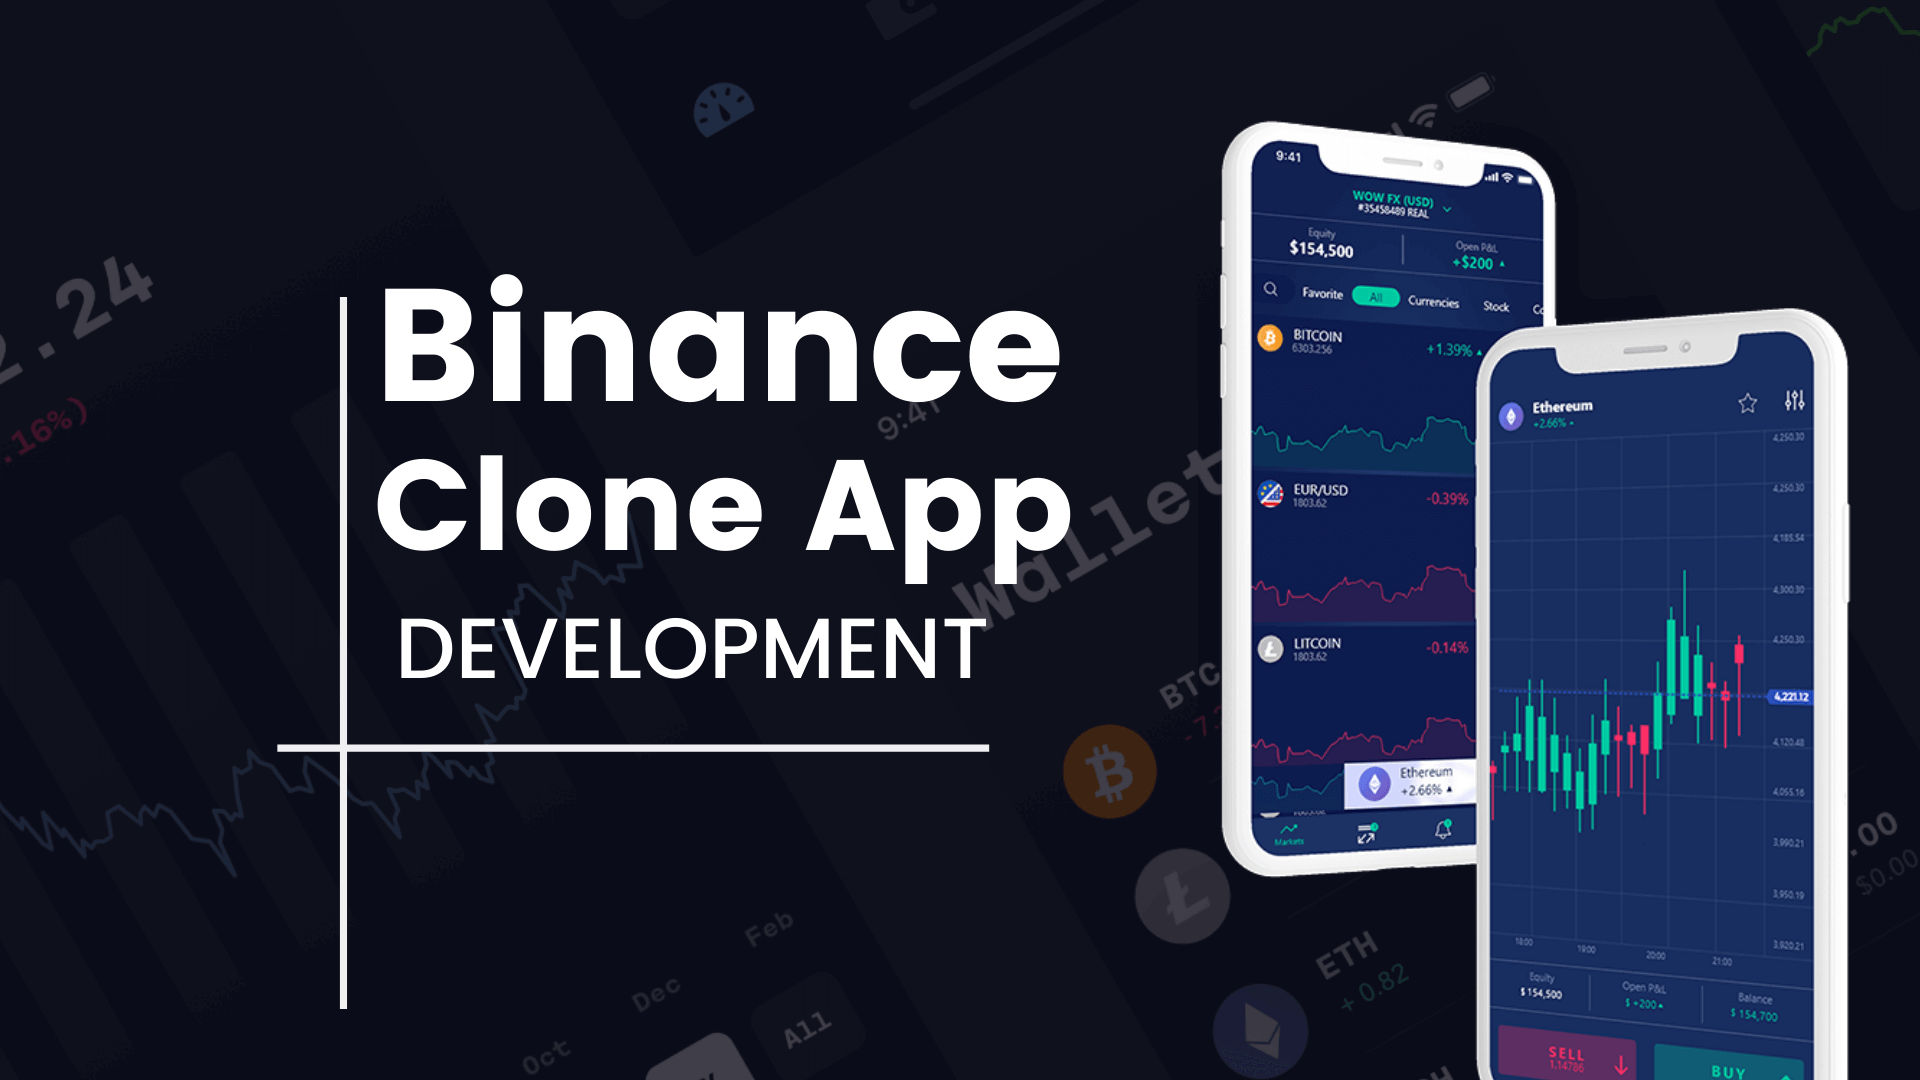 Binance Clone App For Risk-less Trading On The Go!